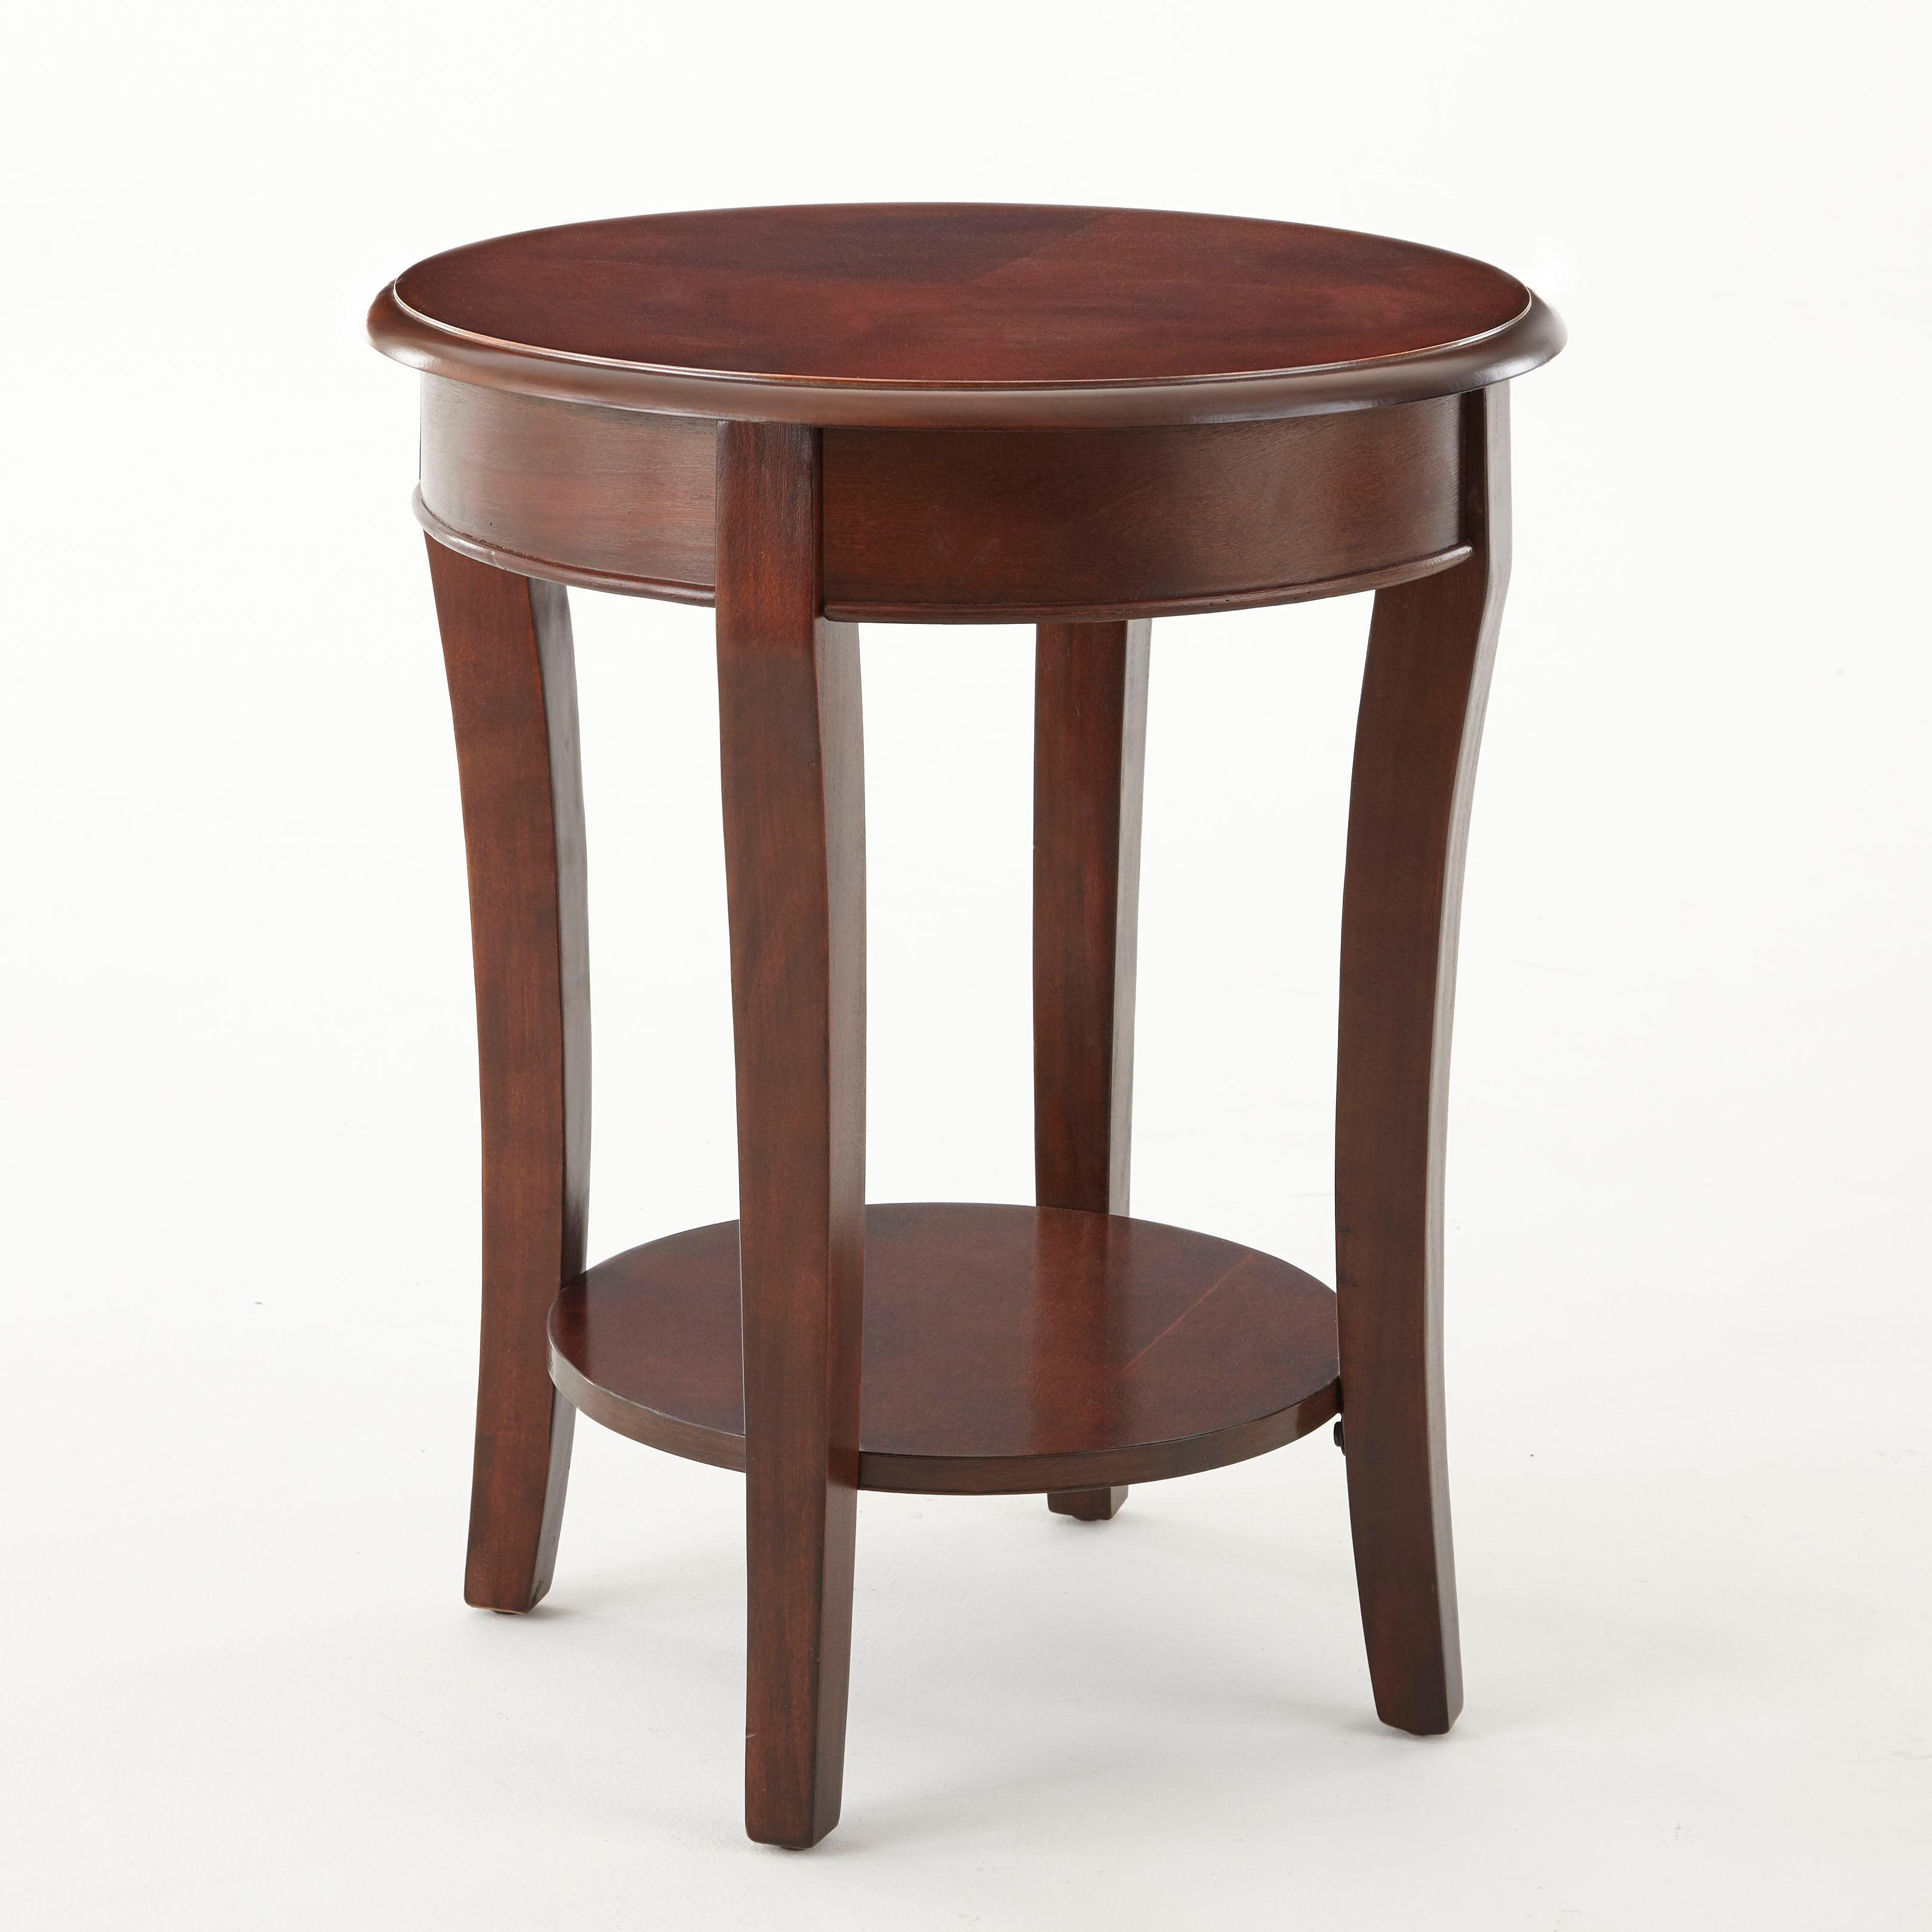 Steve Silver Furniture - Troy - End Table 20" Round - Brown - 5th Avenue Furniture